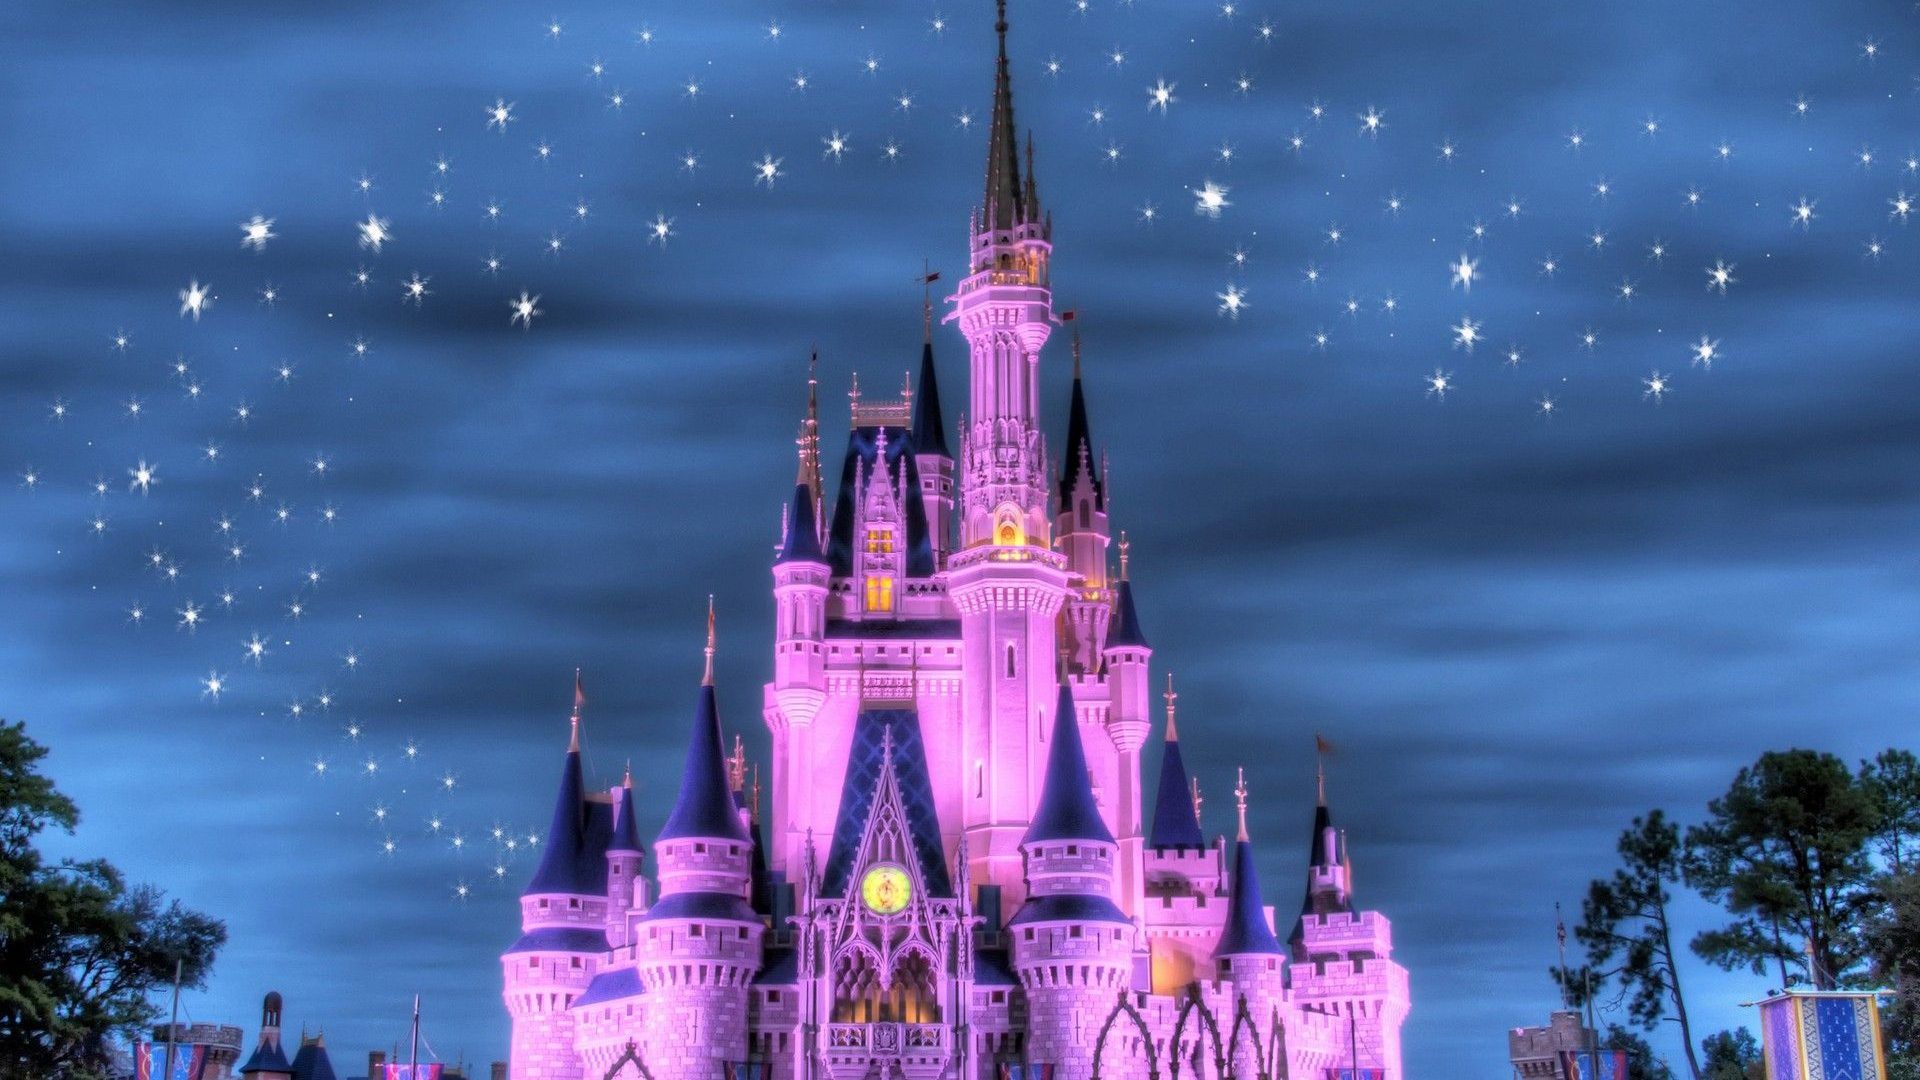 A castle with pink lights and stars - Castle